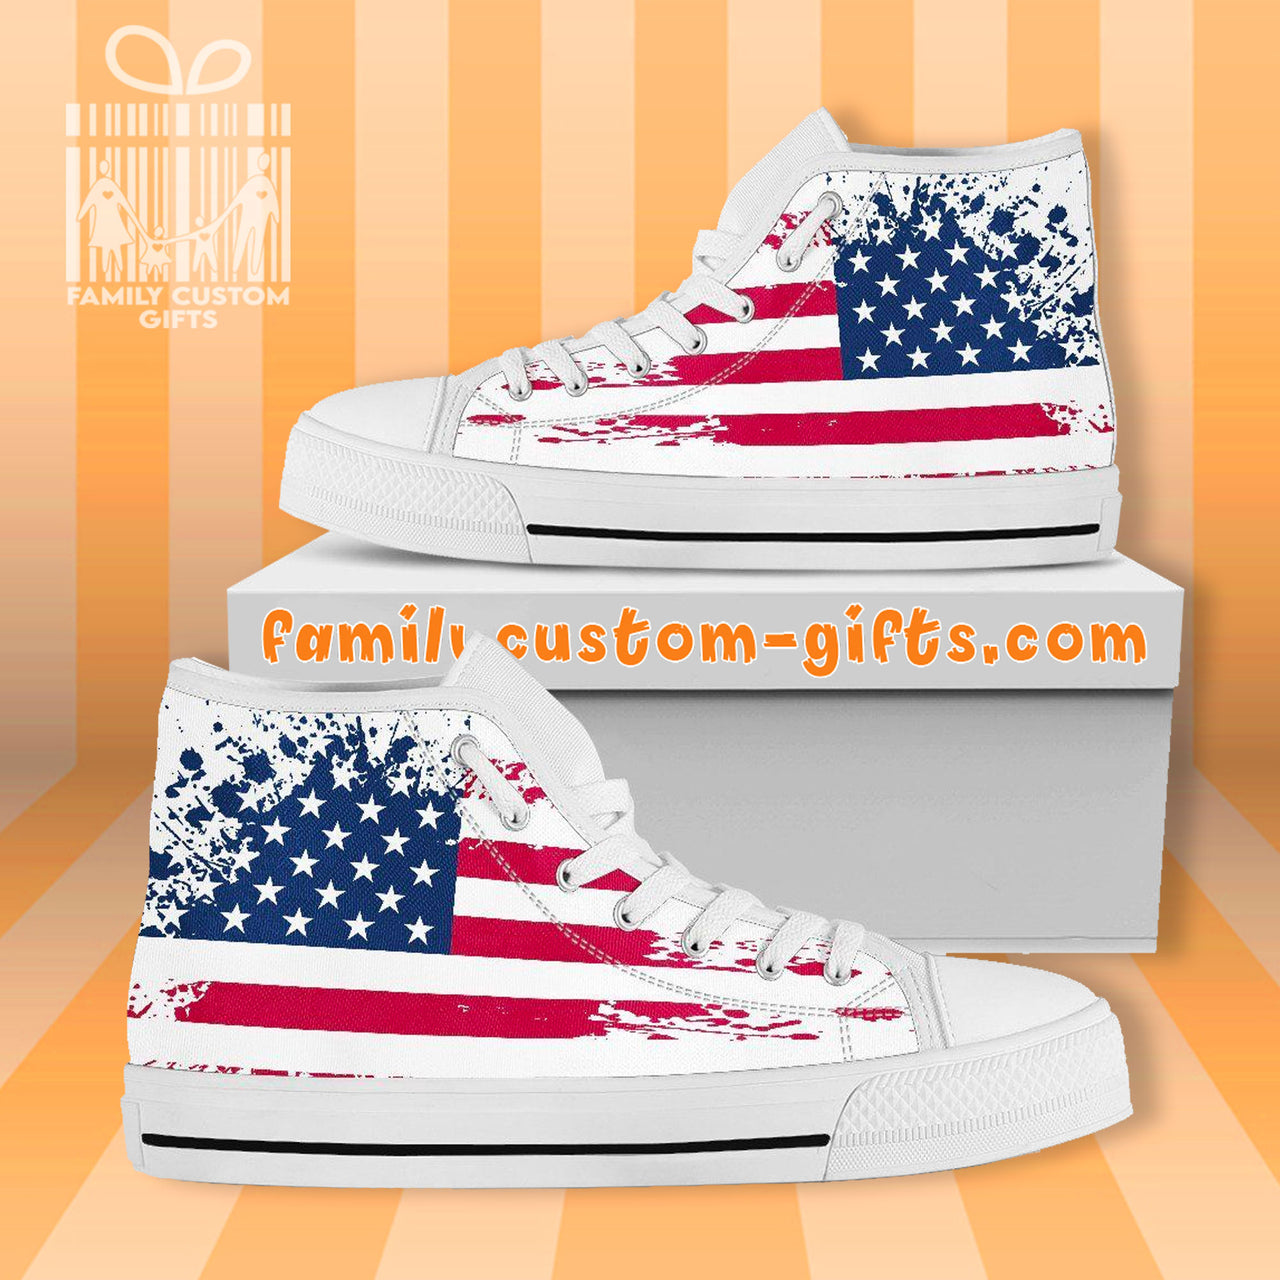 American Flag Retro Grunge High Top Canvas Shoes for Men Women 3D Prints Fashion Sneakers